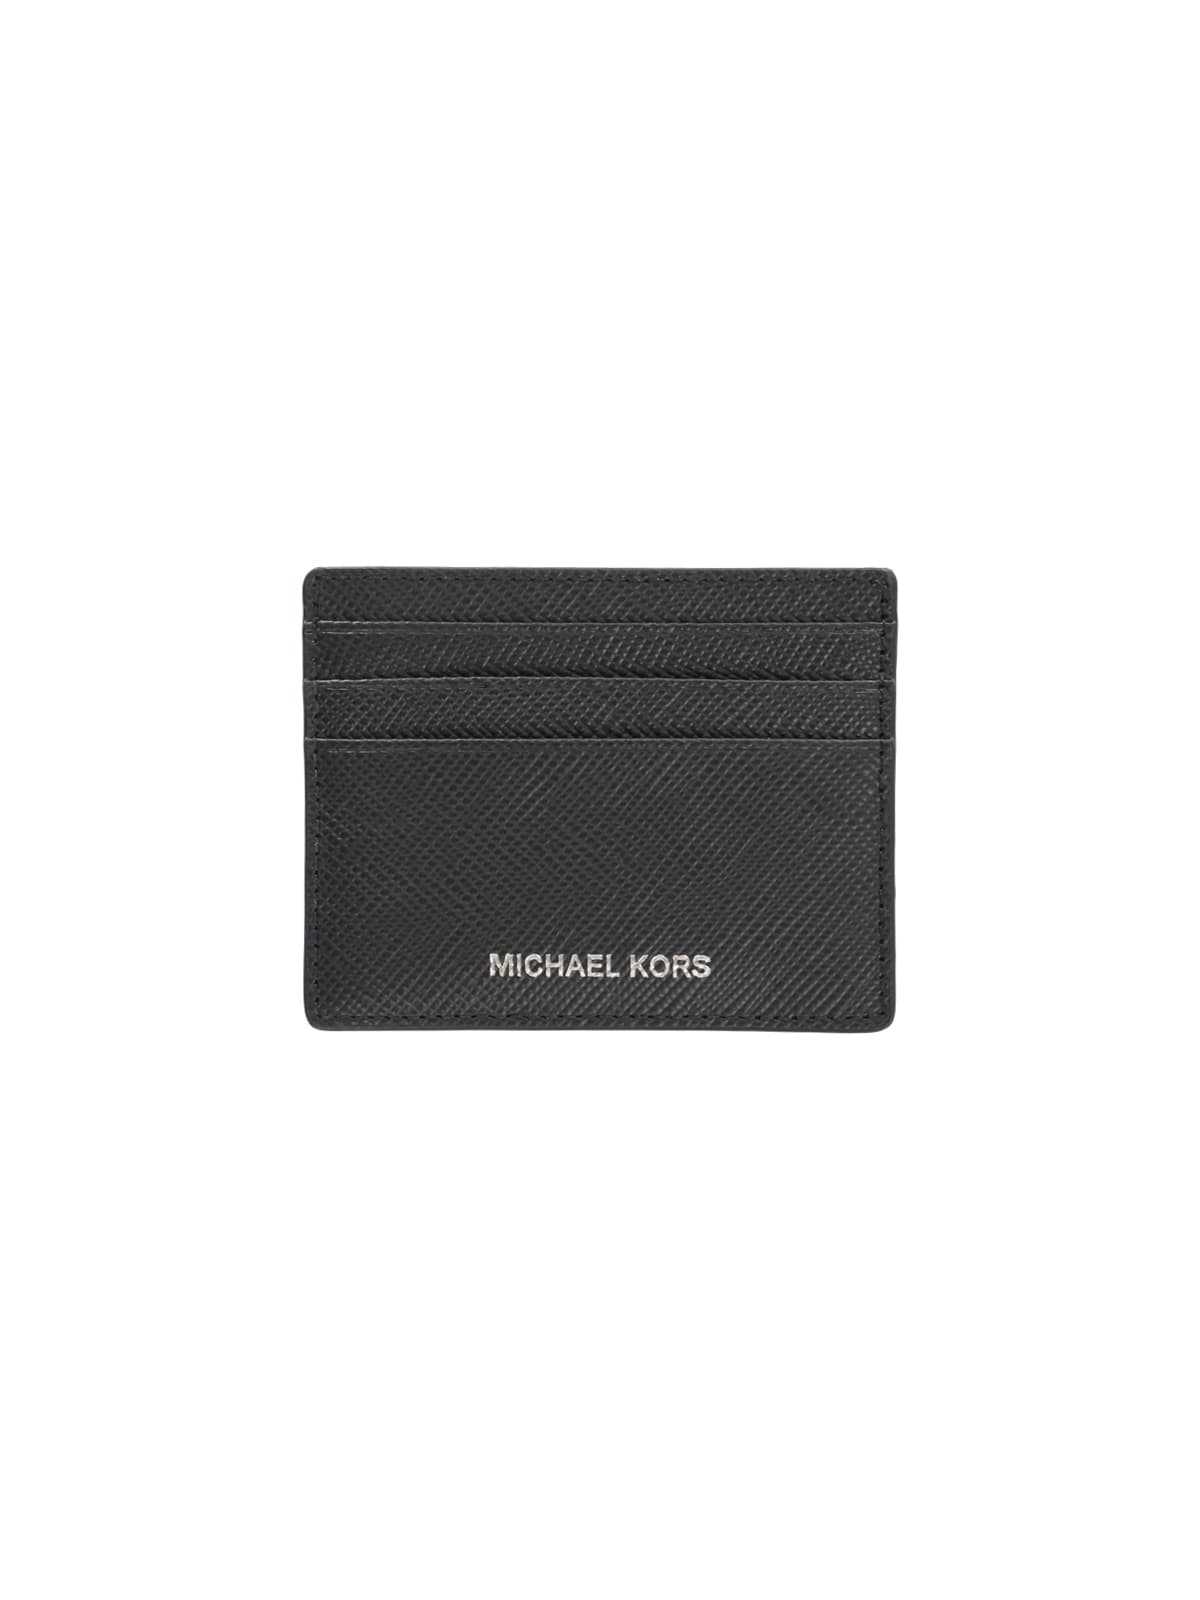 Michael Kors Solid Crossgrain Leather Tall Card Case